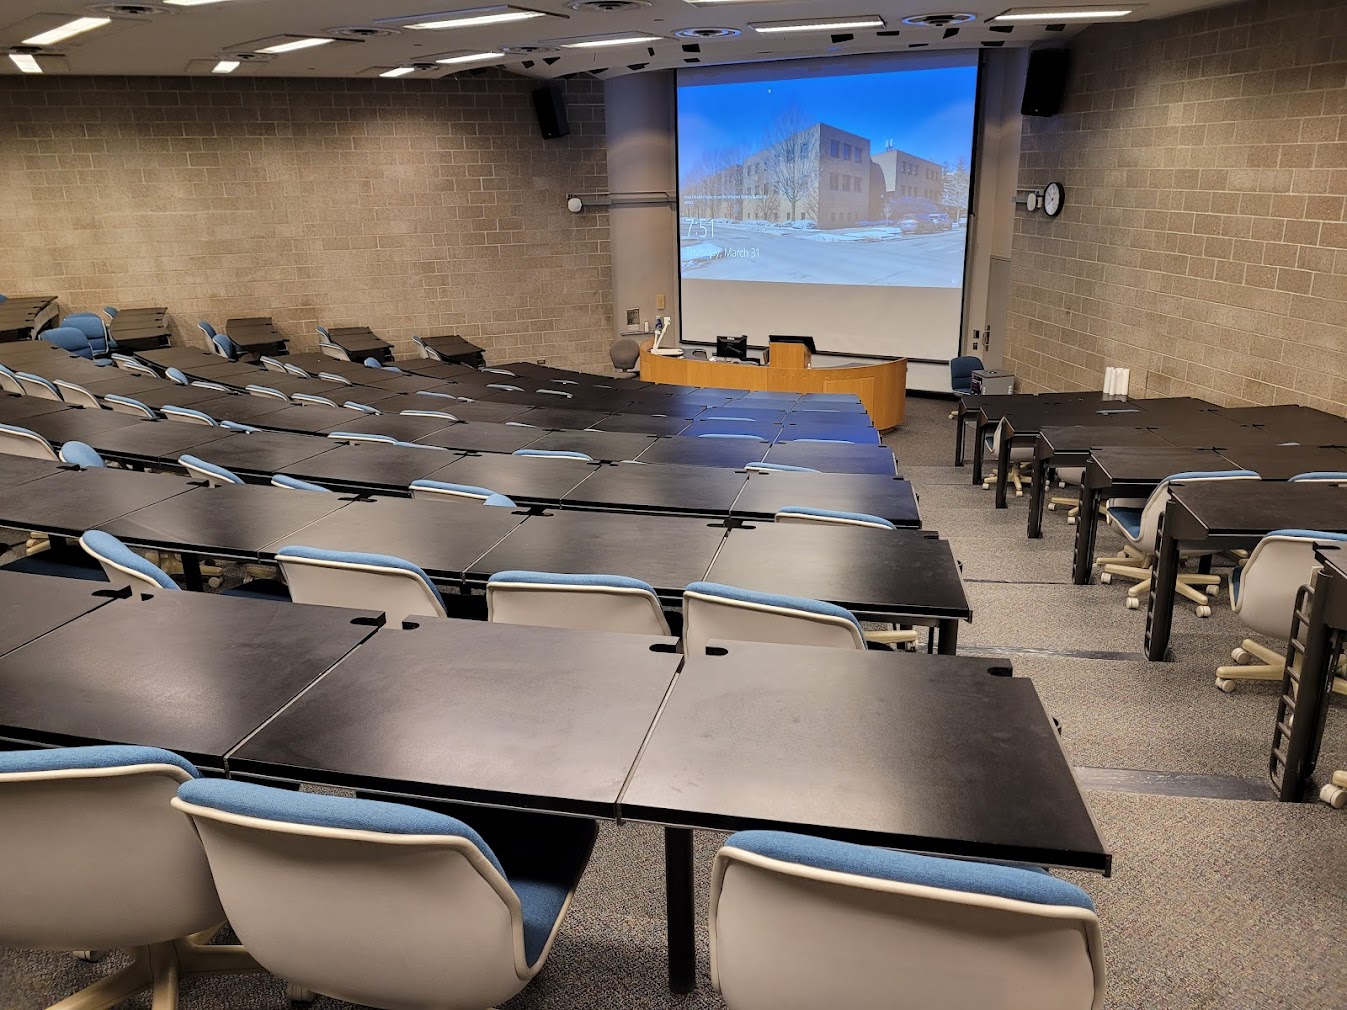 A view of the classroom with tiered, sloped seating, white board, and large lectern in front.